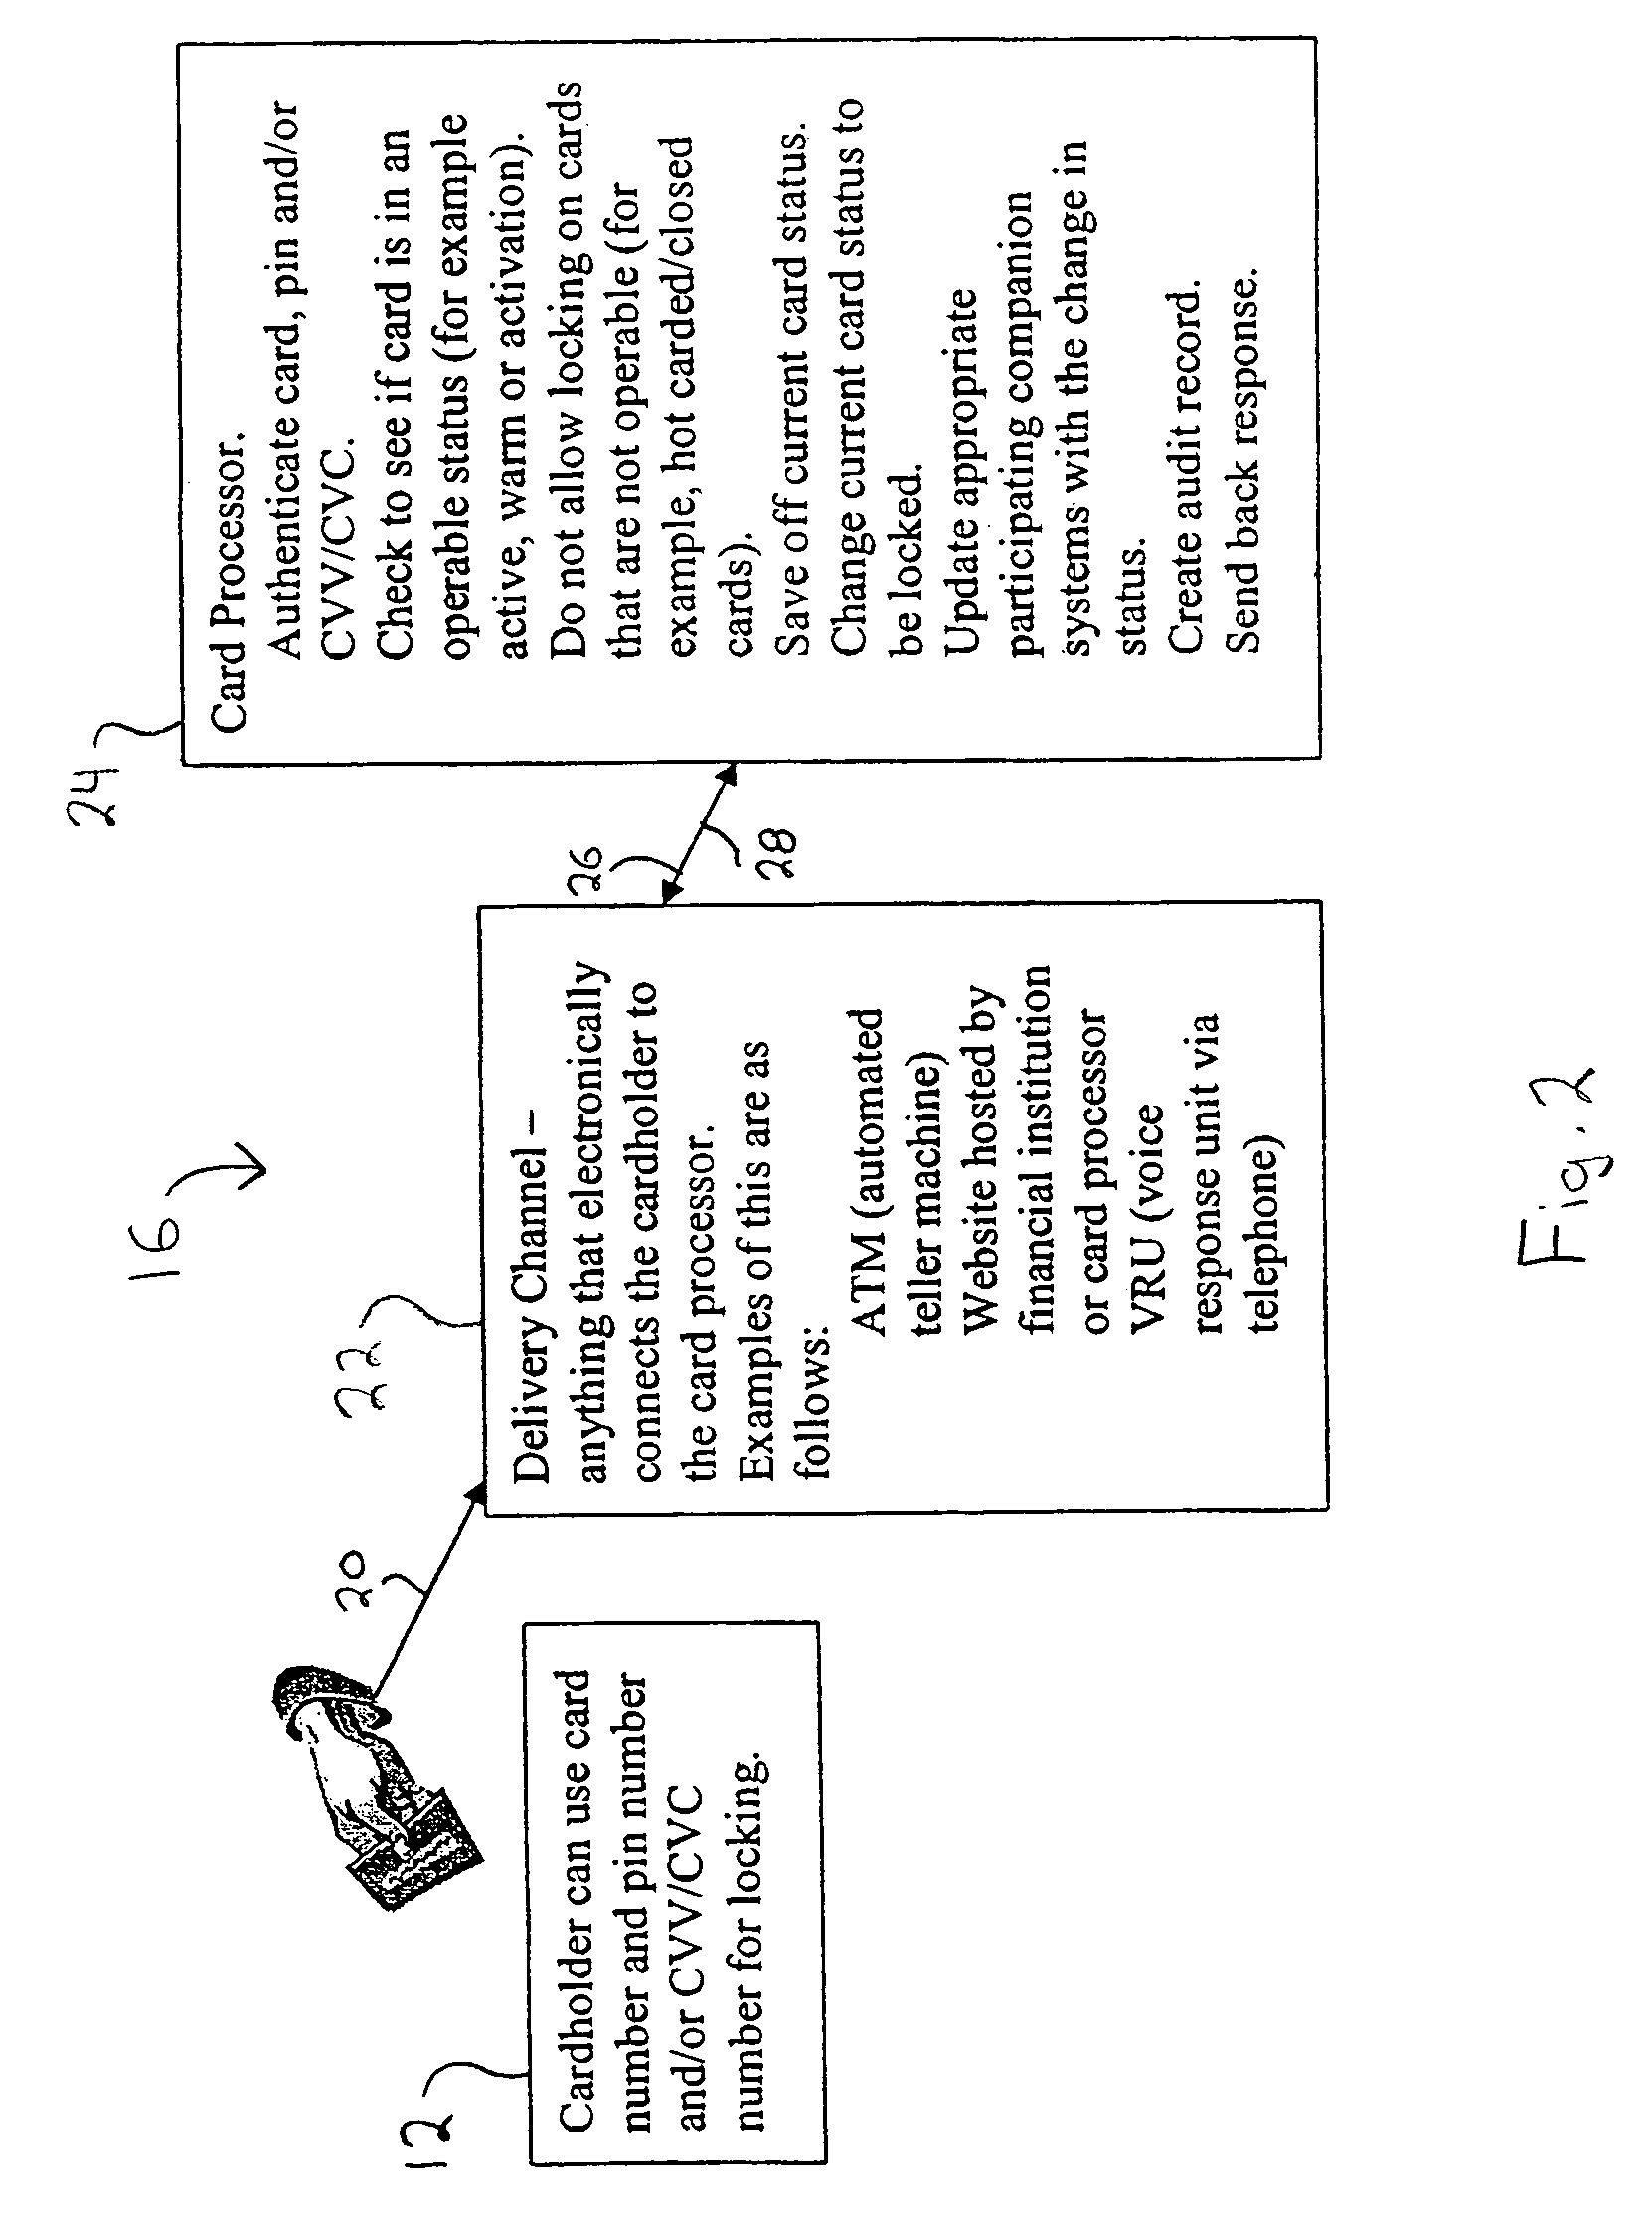 System and method for locking and unlocking a financial account card